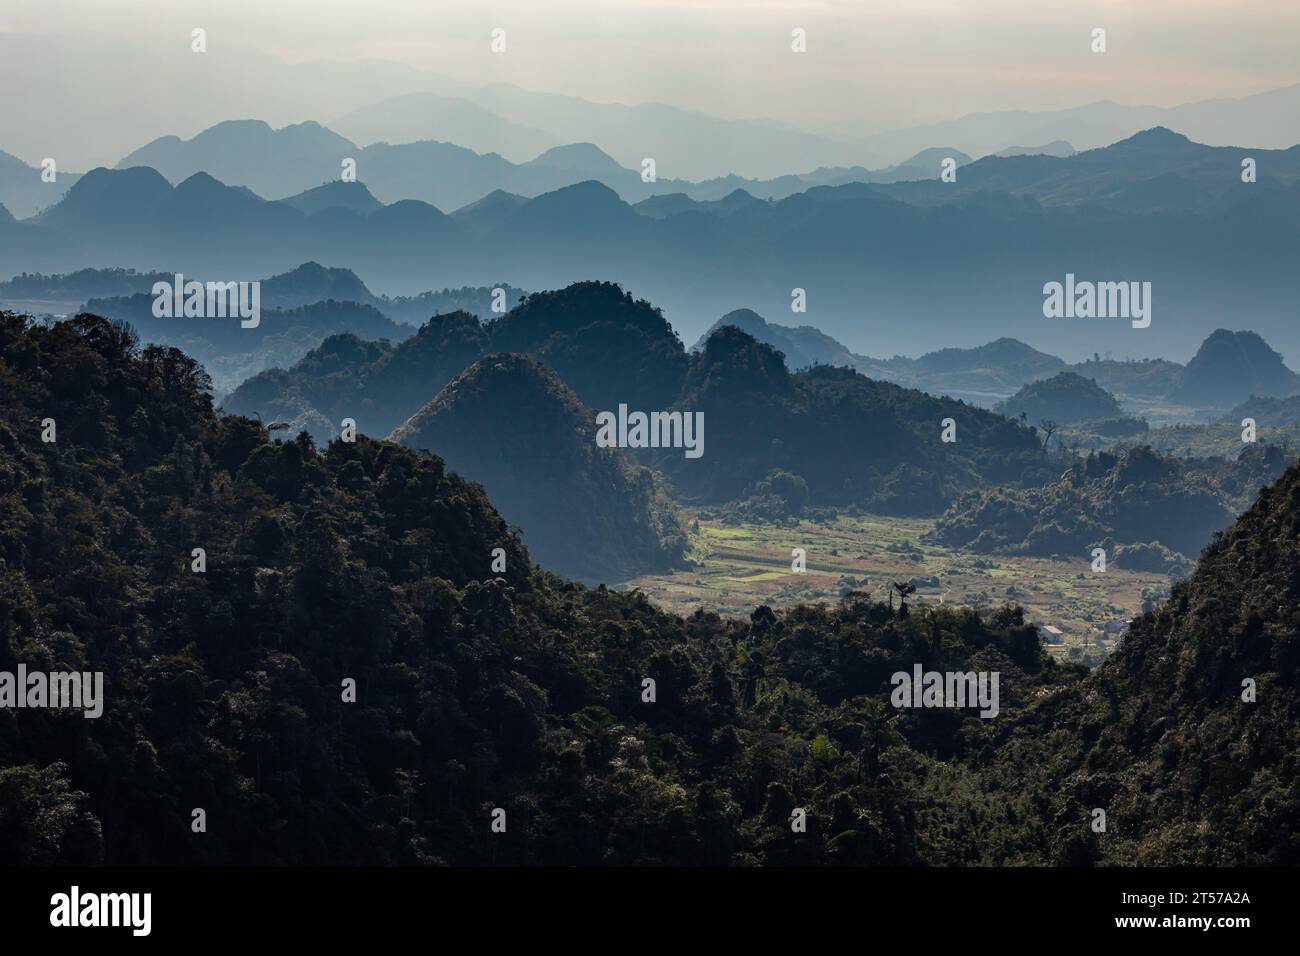 The Landscape of the Ha Giang Loop in Vietnam Stock Photo